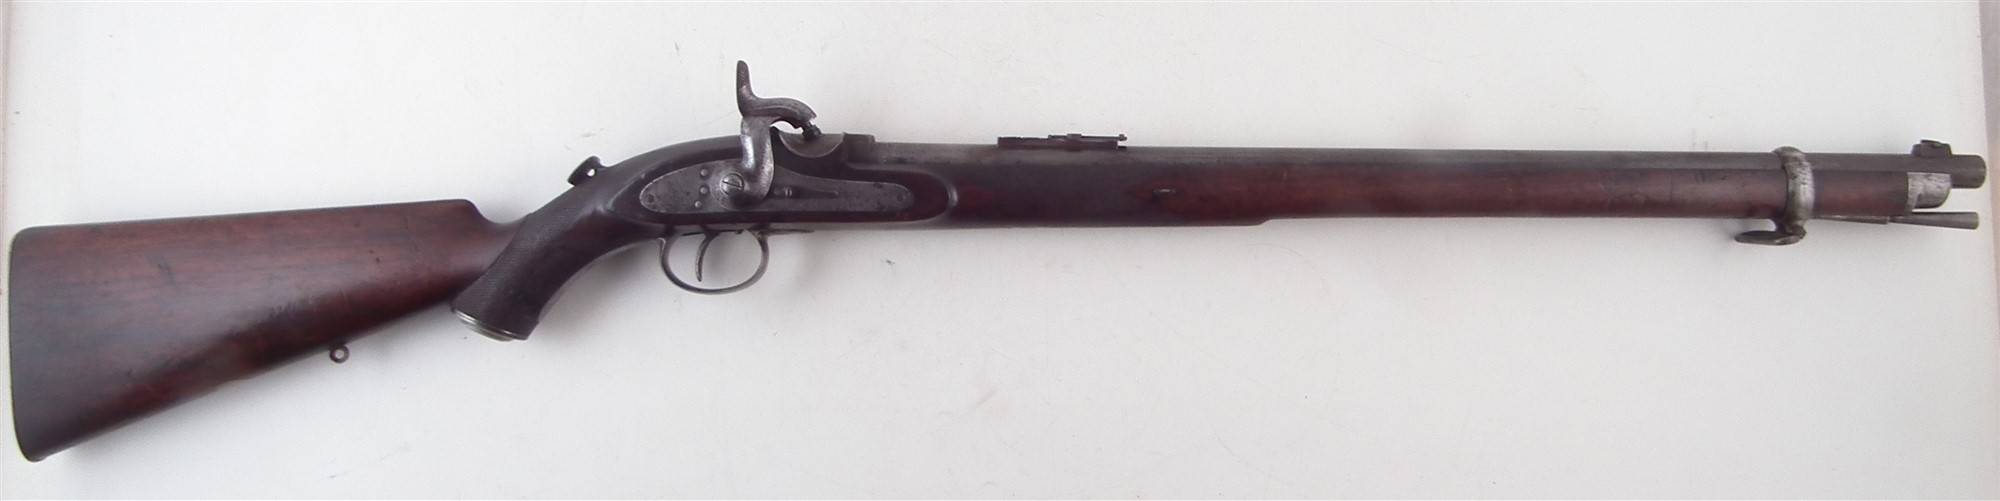 Westley Richards .450 Monkey Tail breech loading percussion carbine, serial number 7103, with - Image 16 of 17